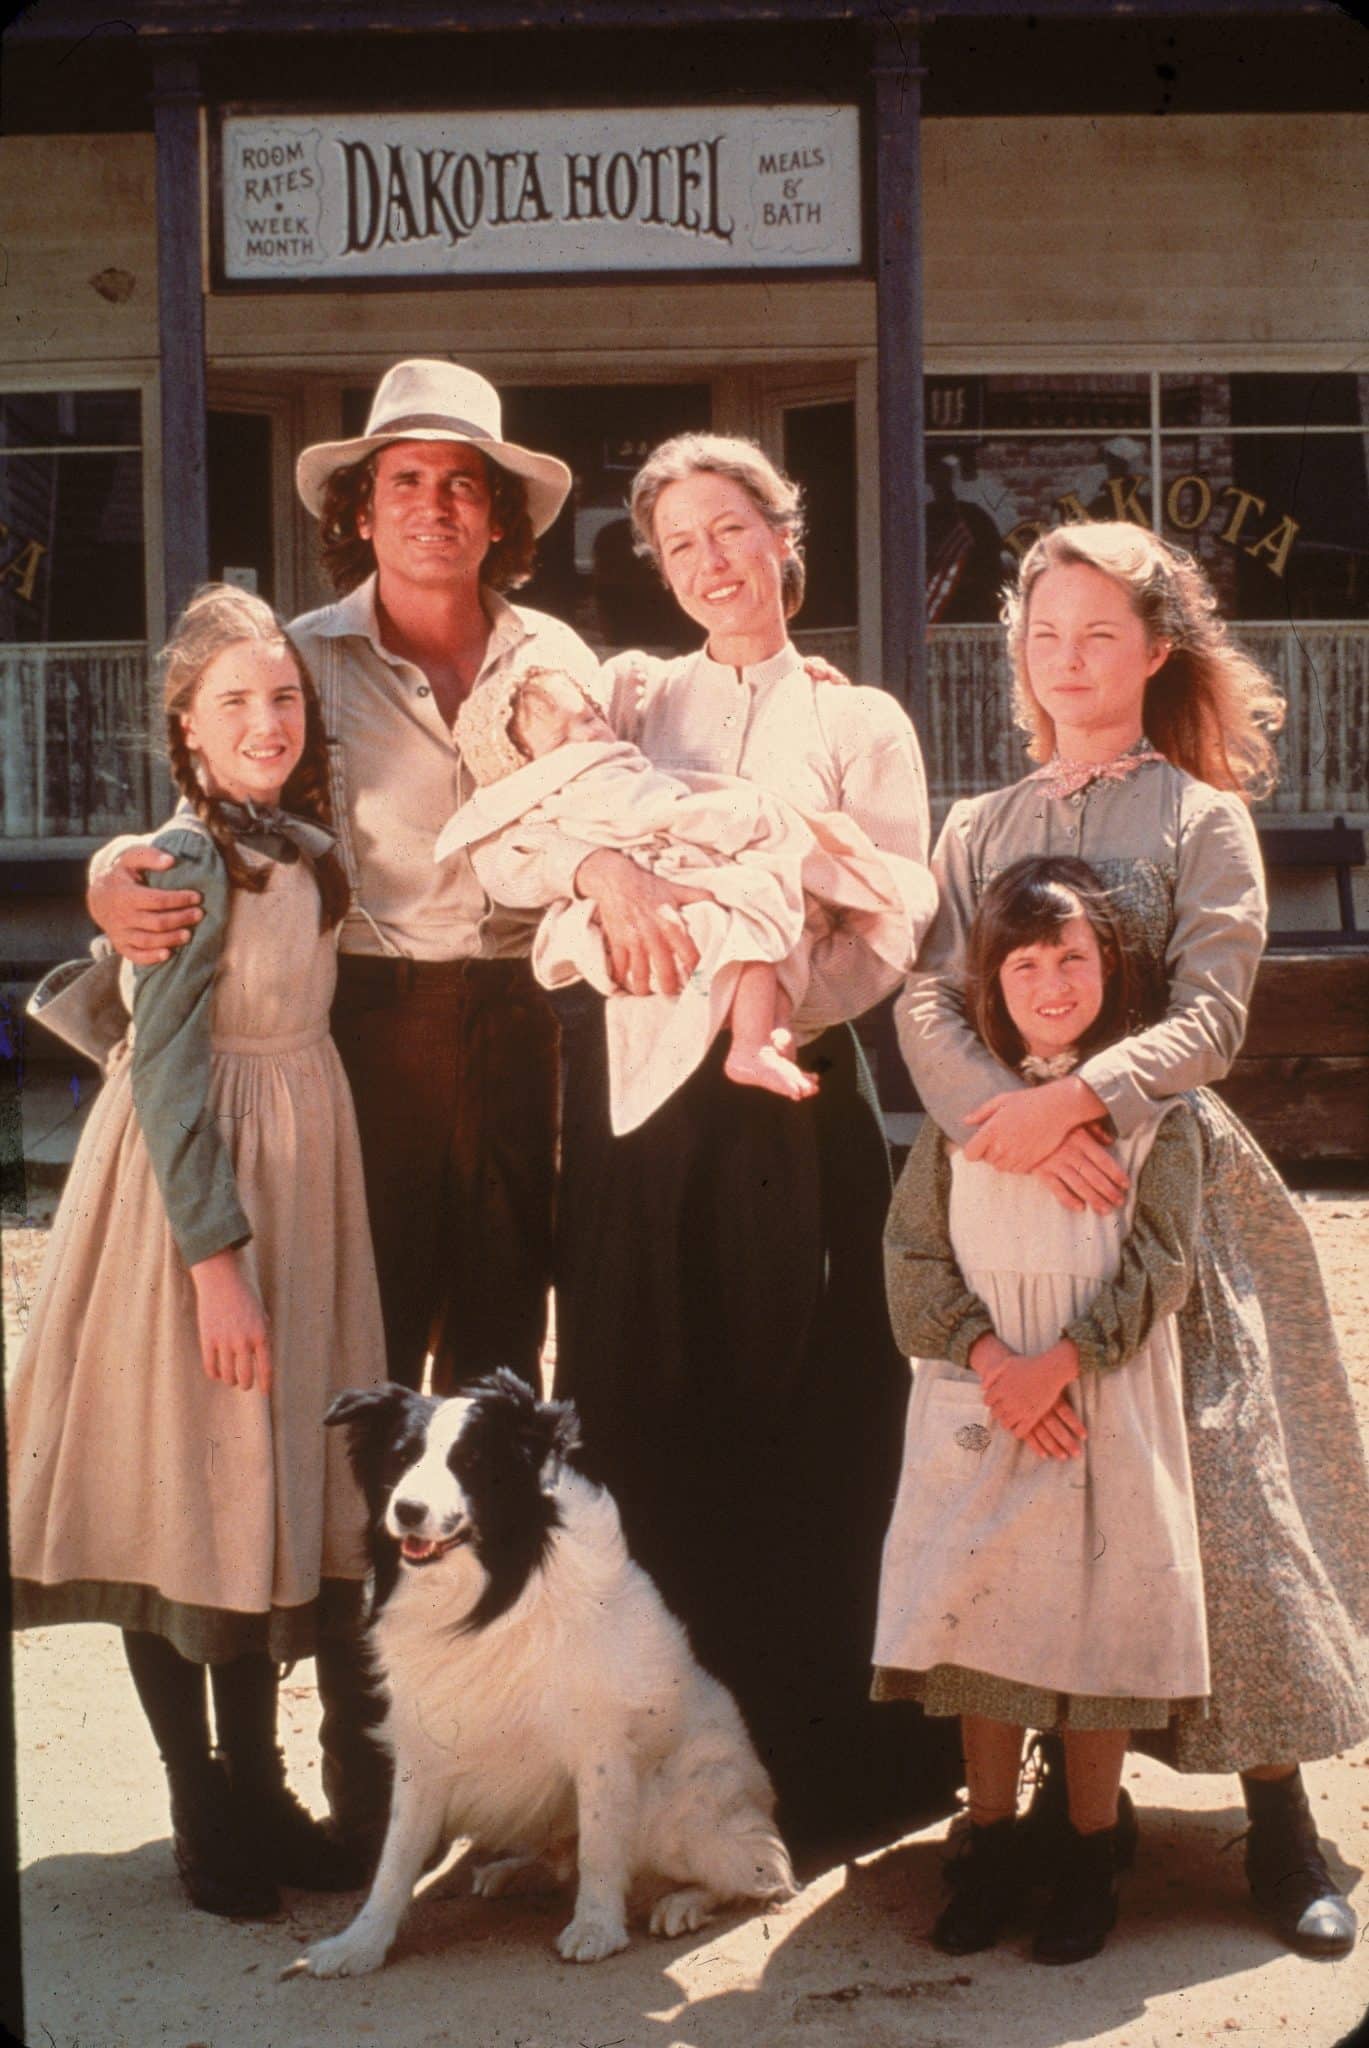 The cast of the television series 'Little House on the Prairie' with a dog on the set of the show, mid 1970s. Clockwise from left: American actors Melissa Gilbert, Michael Landon (1936 - 1991), Karen Grassle, who holds an unidentified baby, Melissa Sue Anderson, and Lindsay or Sidney Greenbush. (Photo by Fotos International/Getty Images)